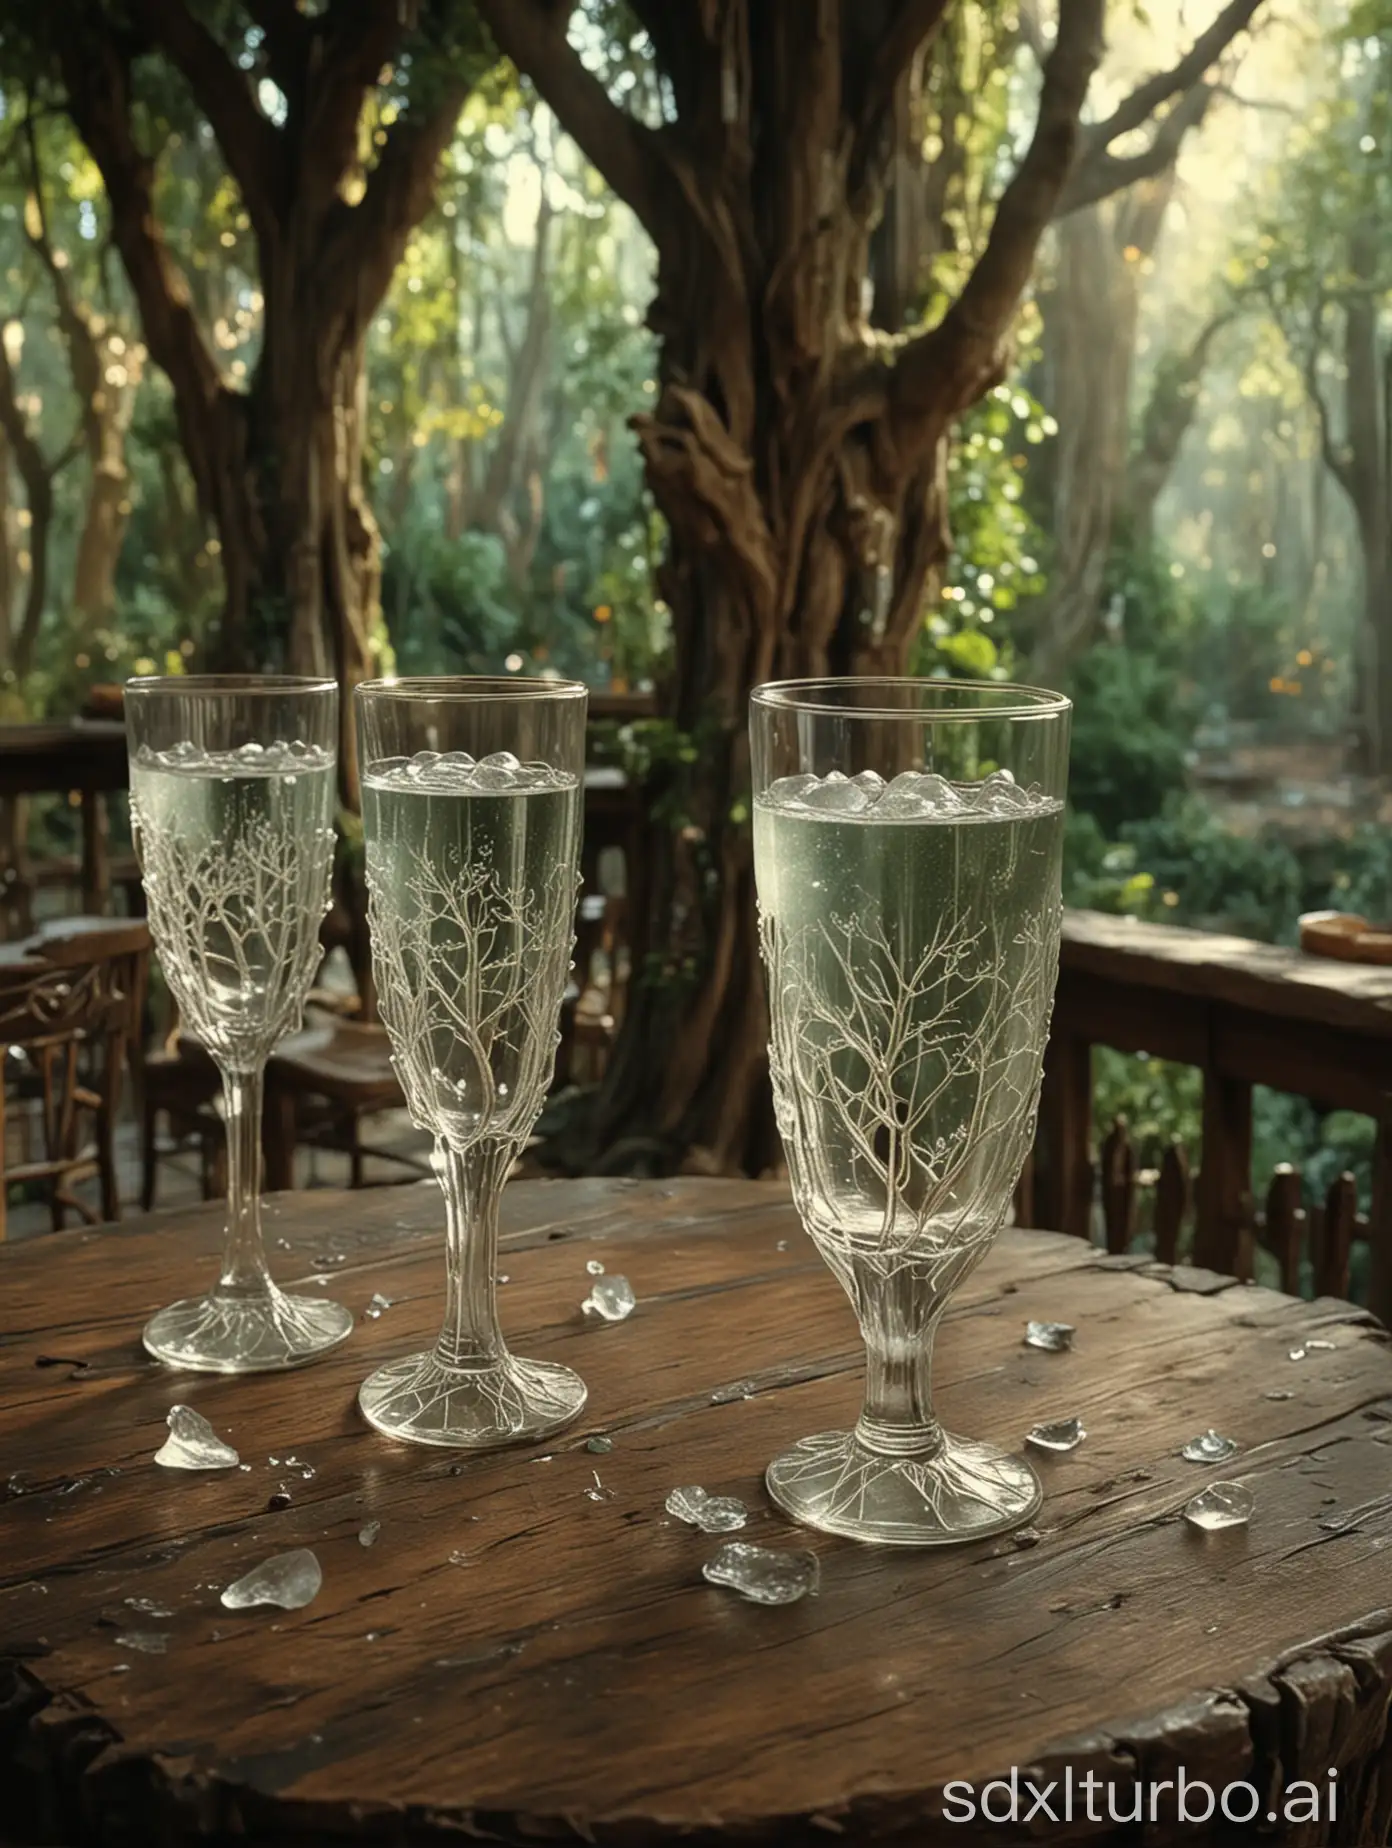 screenshot from the fantasy film 'The Lord of the Rings' 2001, close-up, soft focus, table in an elven tree house in Lothlorien, exquisite glass glasses with cold drinks with ice, dreamy effect, magic